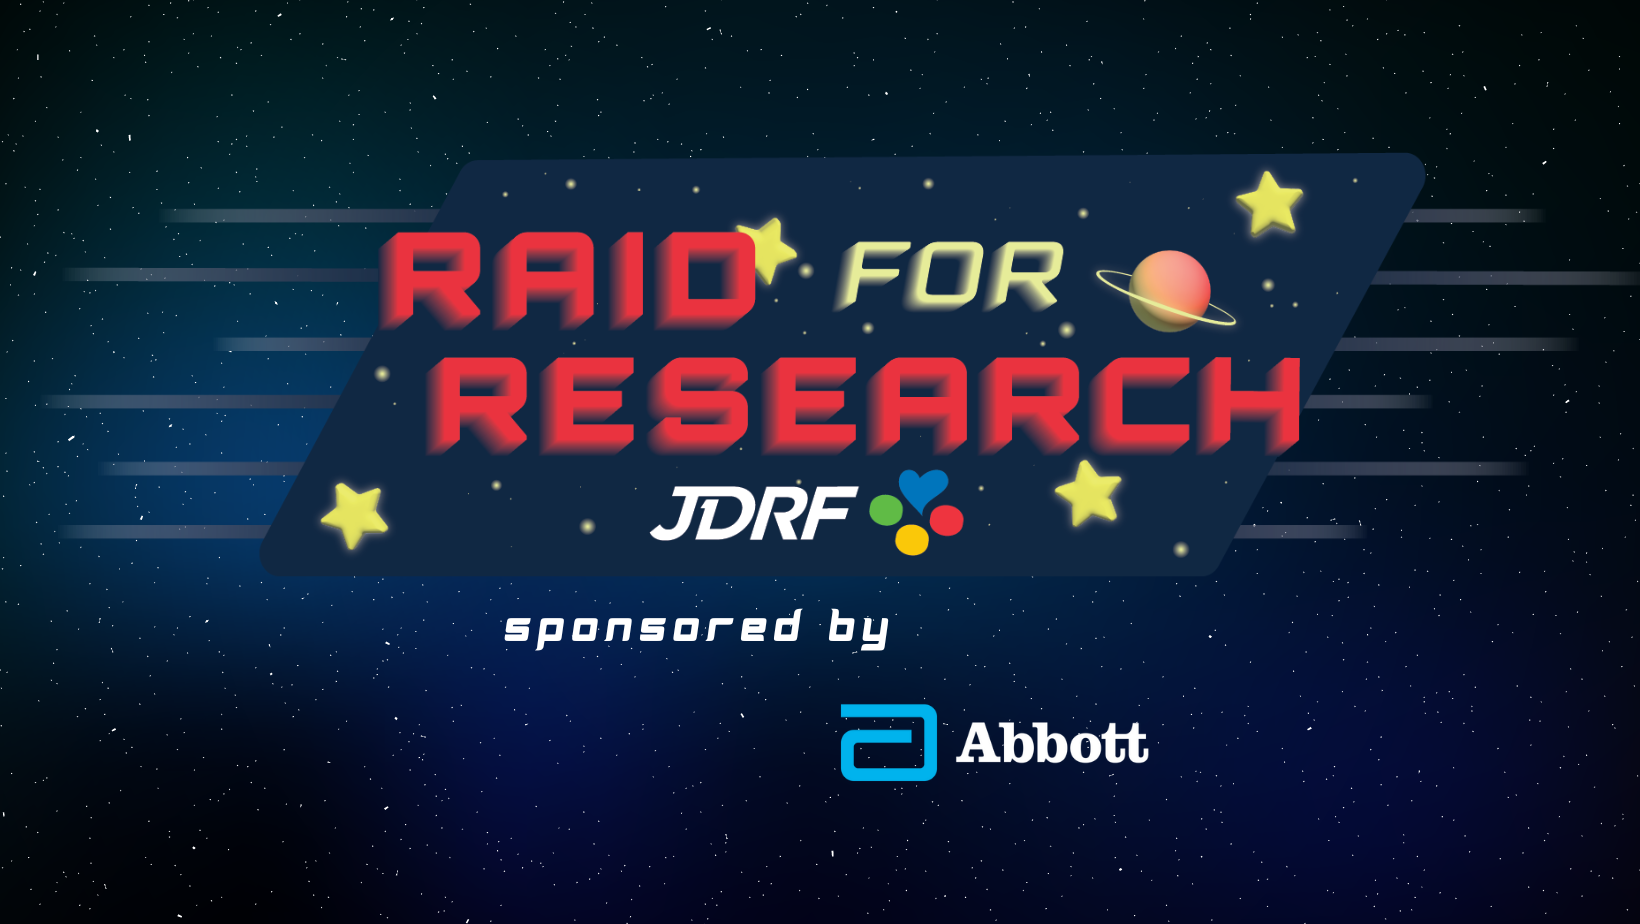 Raid for Research sponsored by Abbott